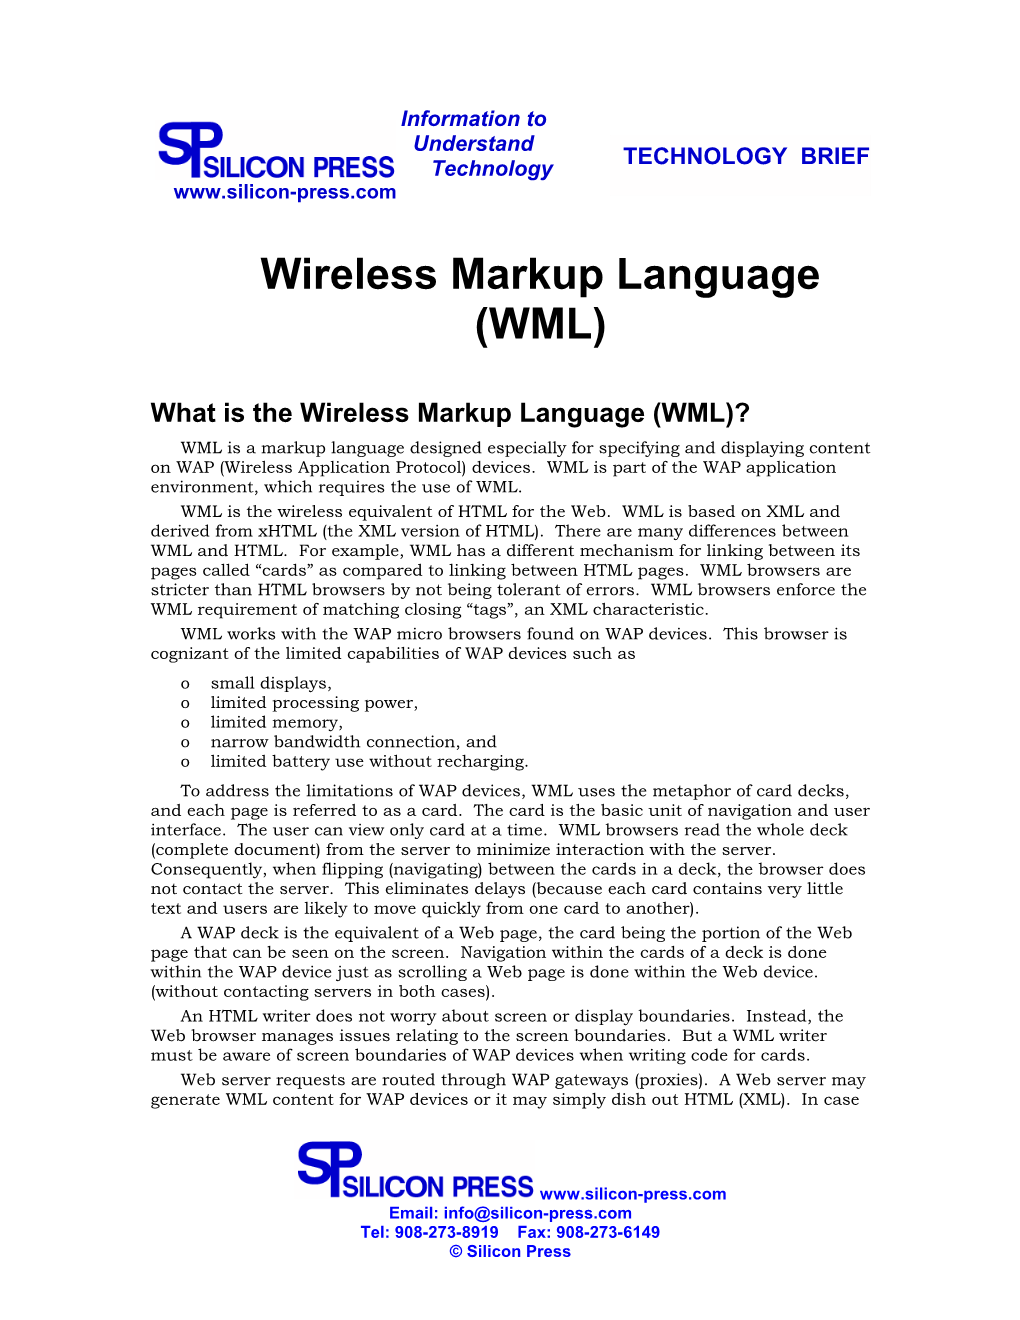 (WML) What Is the Wireless Markup Language (WML)?